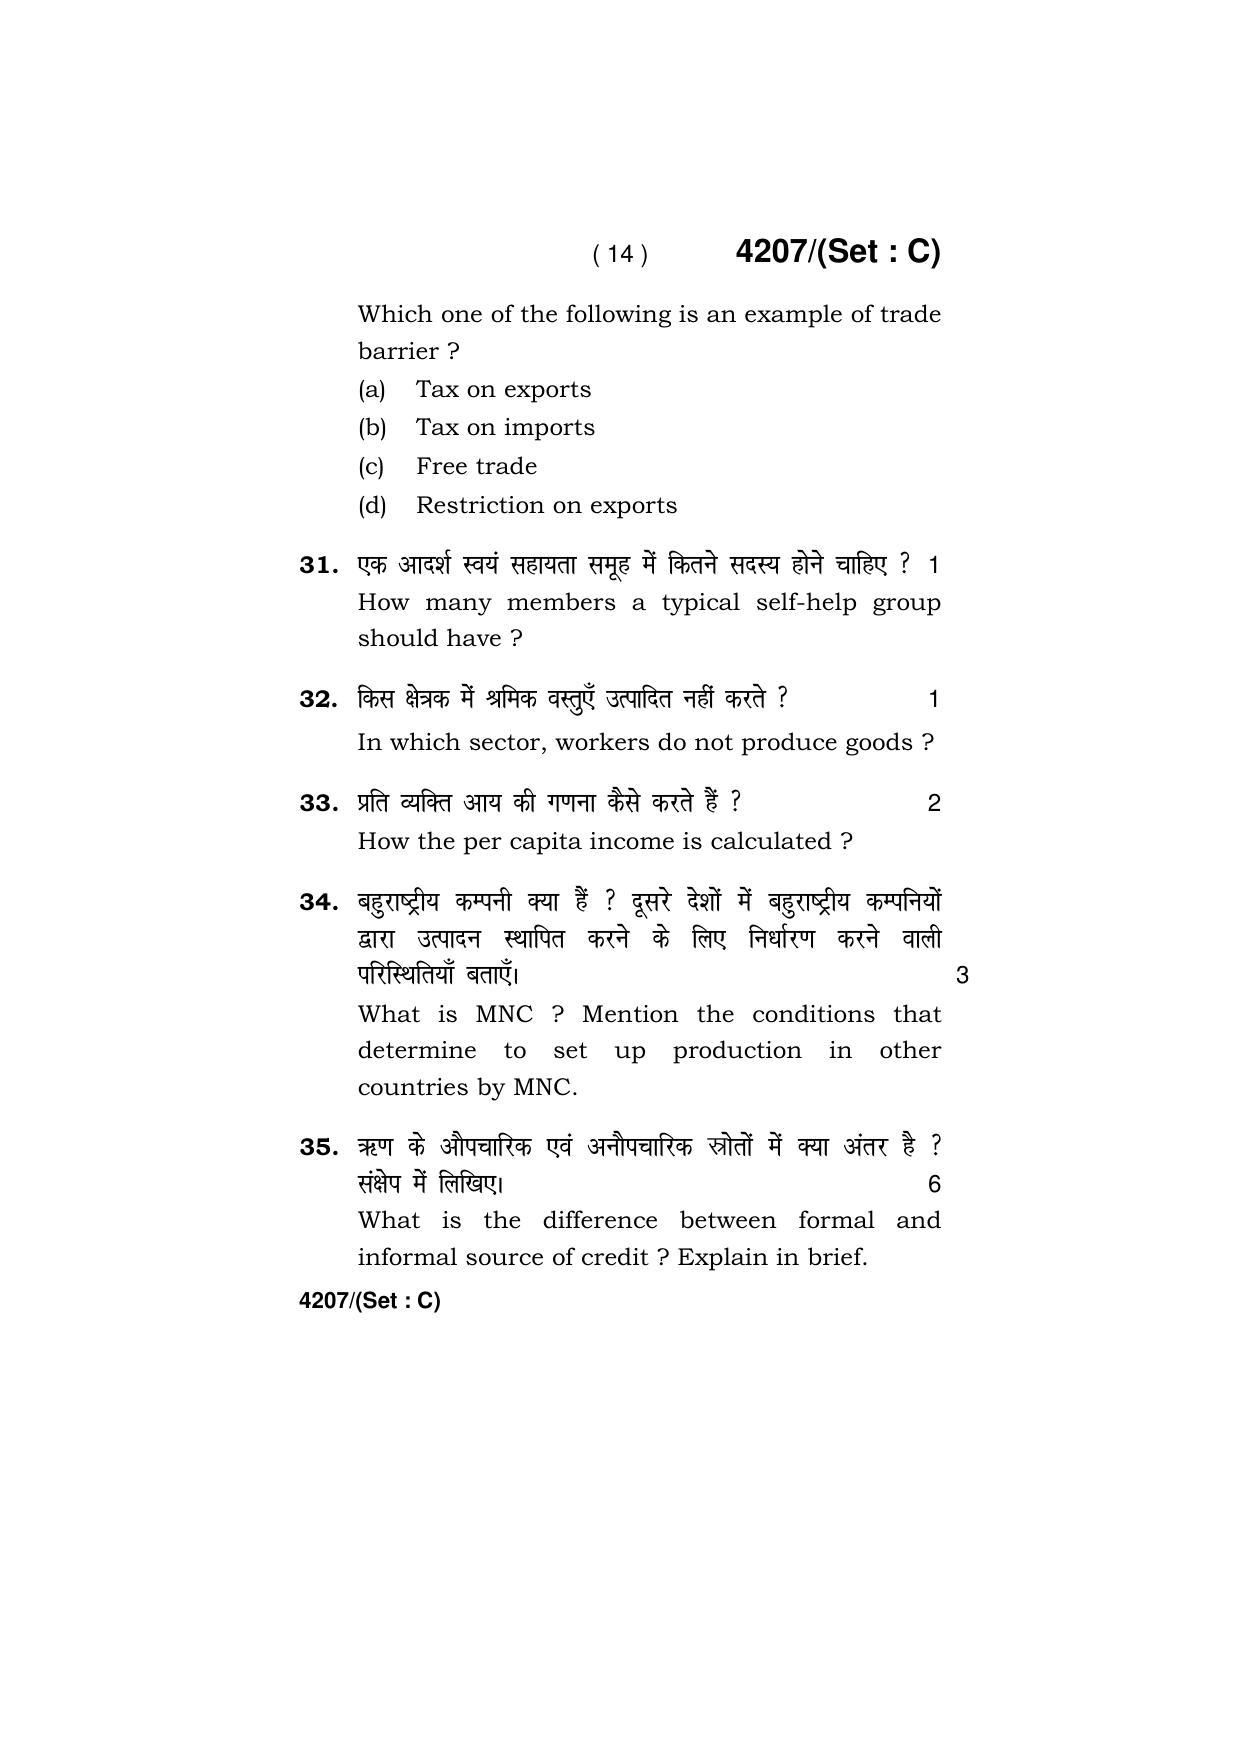 Haryana Board HBSE Class 10 Social Science (All Set) 2019 Question Paper - Page 44